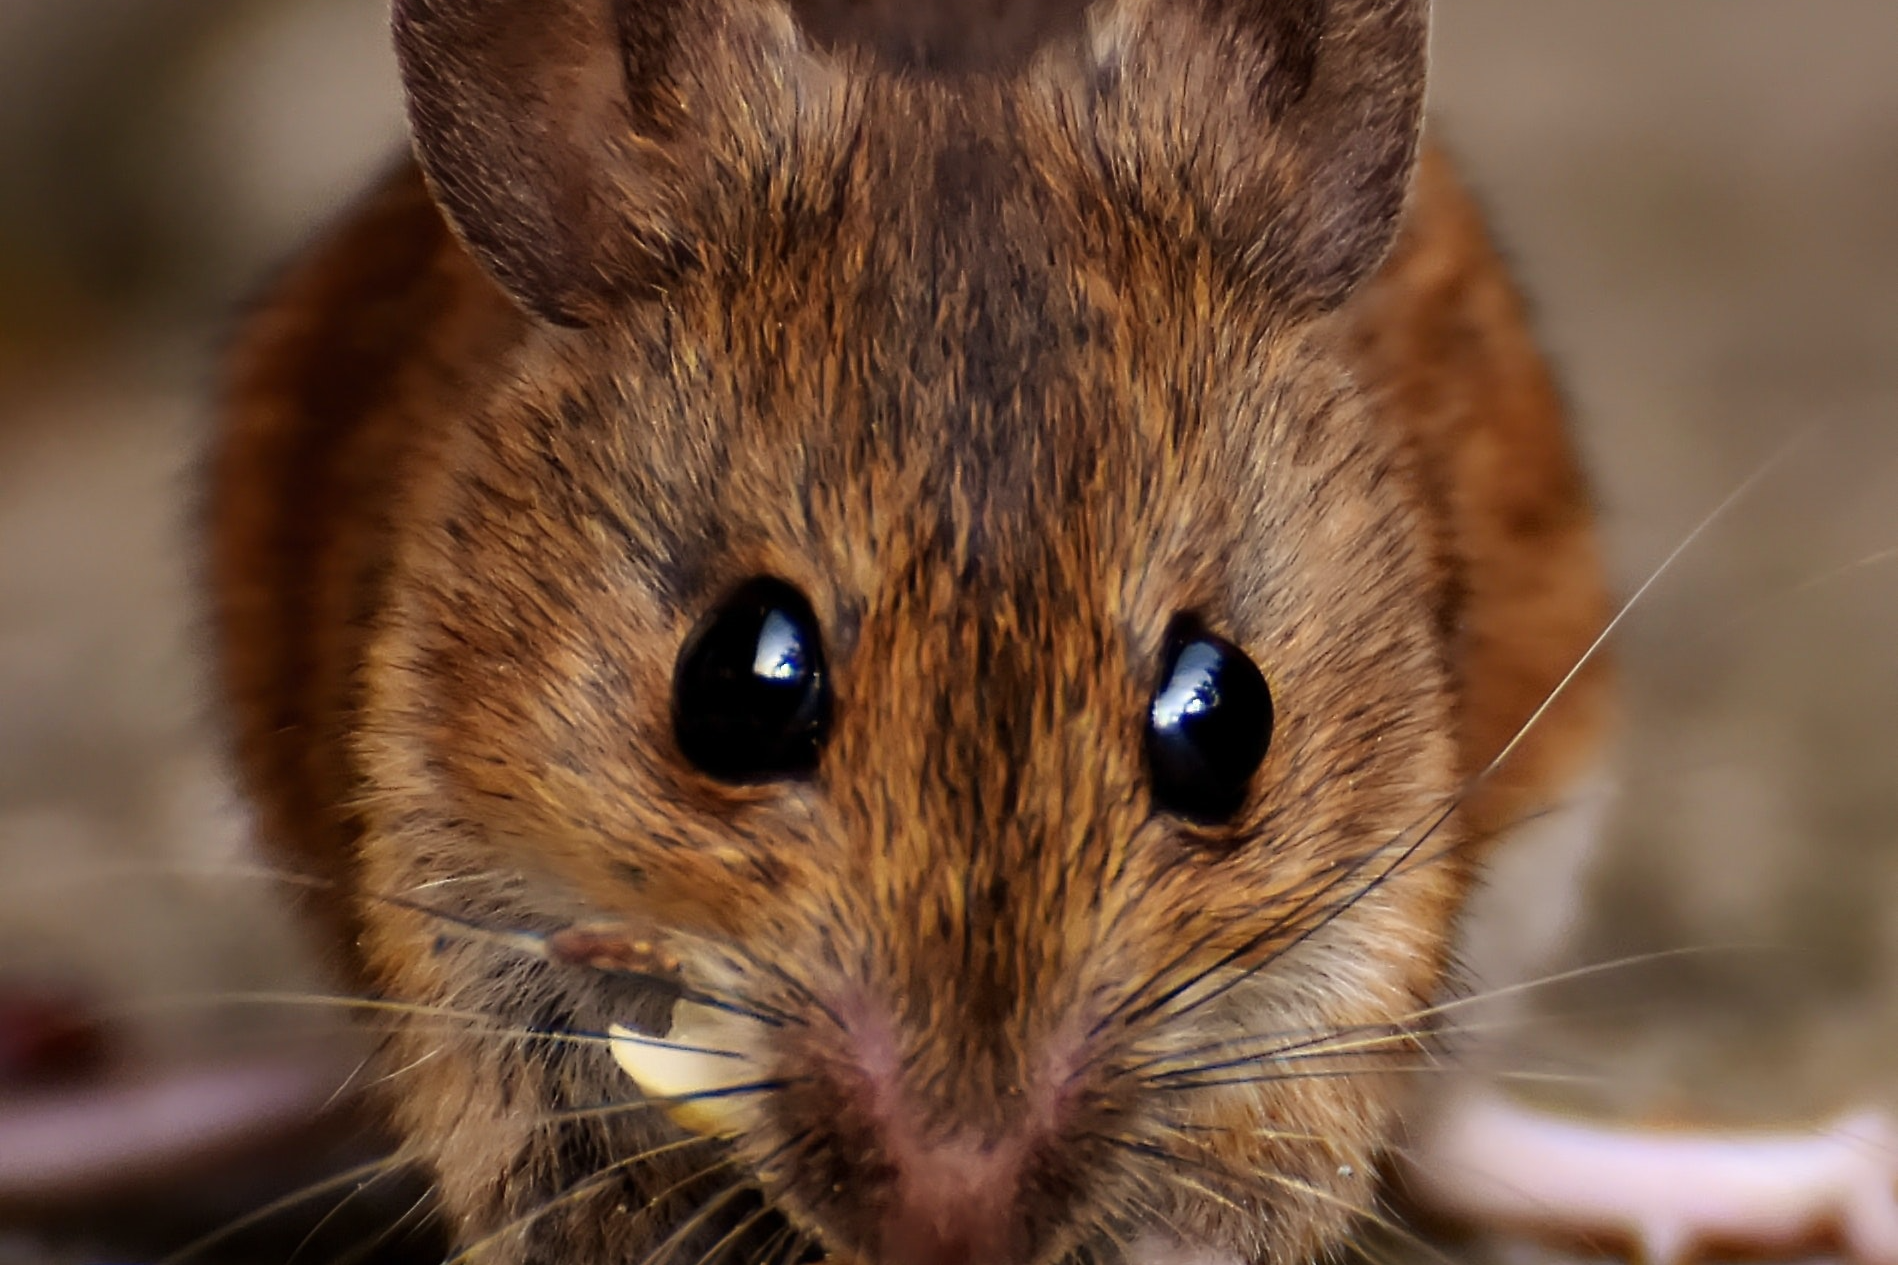 house mice can spread disease and illness